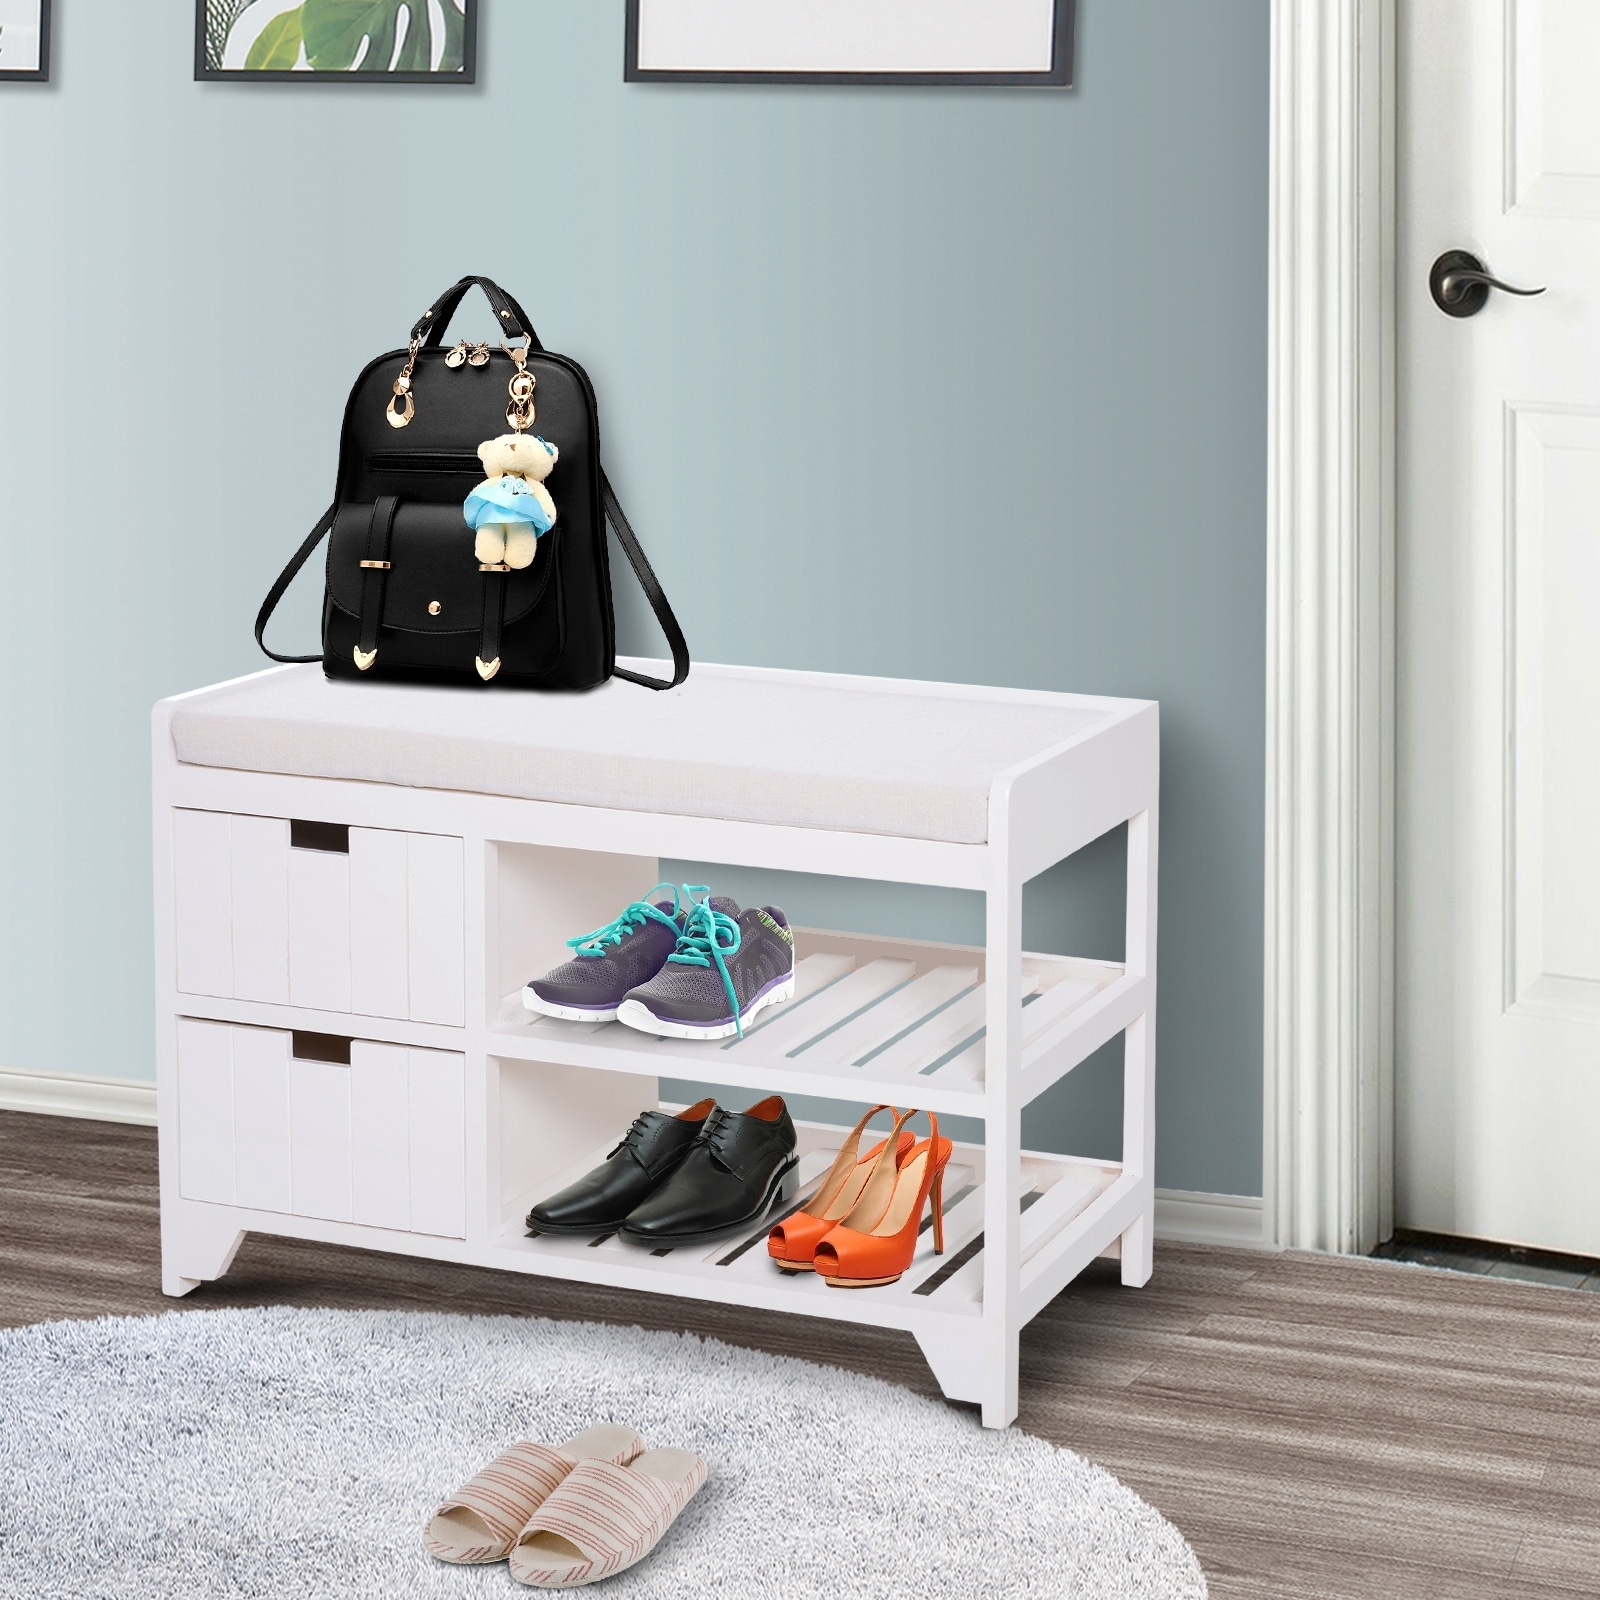 https://ak1.ostkcdn.com/images/products/is/images/direct/bf29aef75392dd52222fa4ddfd0cb3bed1778282/HomCom-Wooden-Shoe-Rack---Entryway-Bench-HomCom-Wooden-Shoe-Rack---Storage-Entryway-Bench-Organizer-w--Drawer-%28White%29.jpg